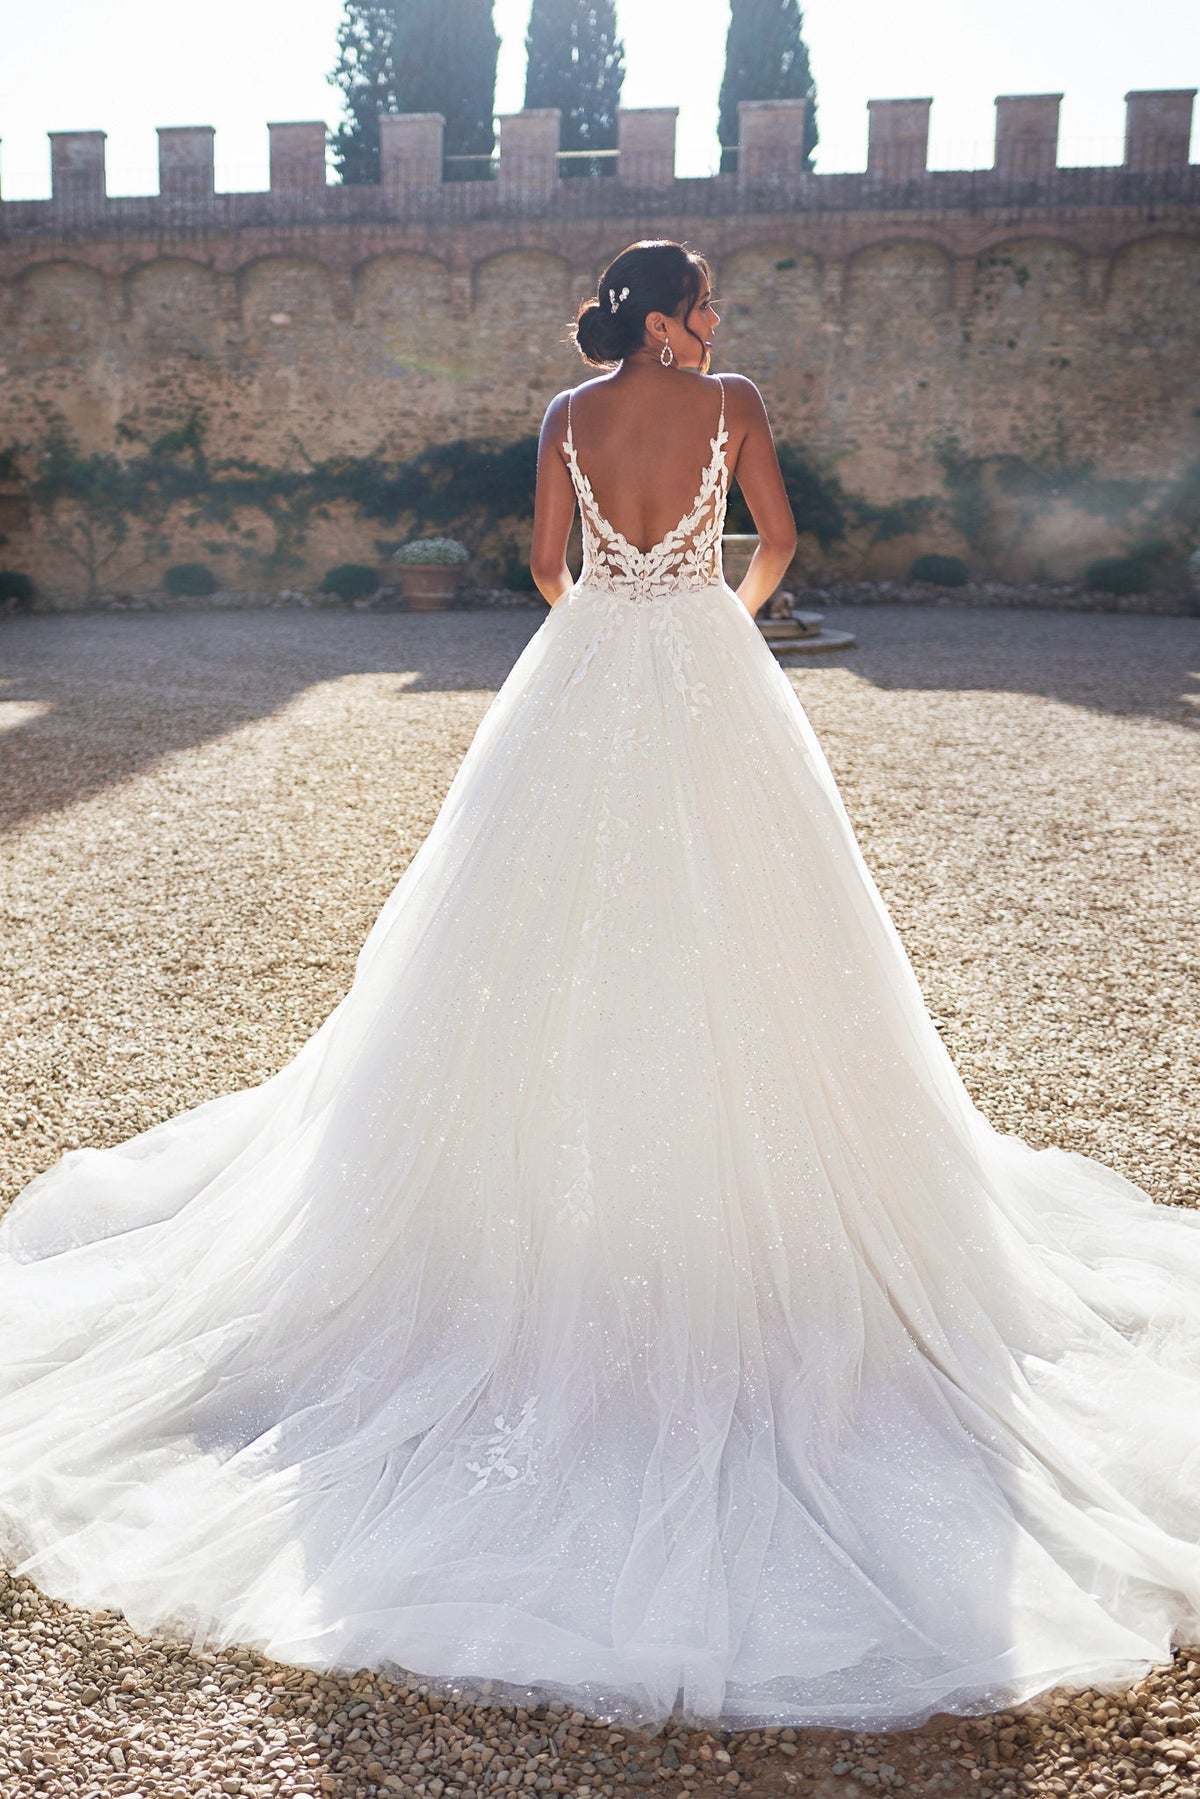 Stunning Lace-Embroidered Bridal Ball Gown Wedding Dress with Sparkling Tulle Skirt and Floral Appliqués